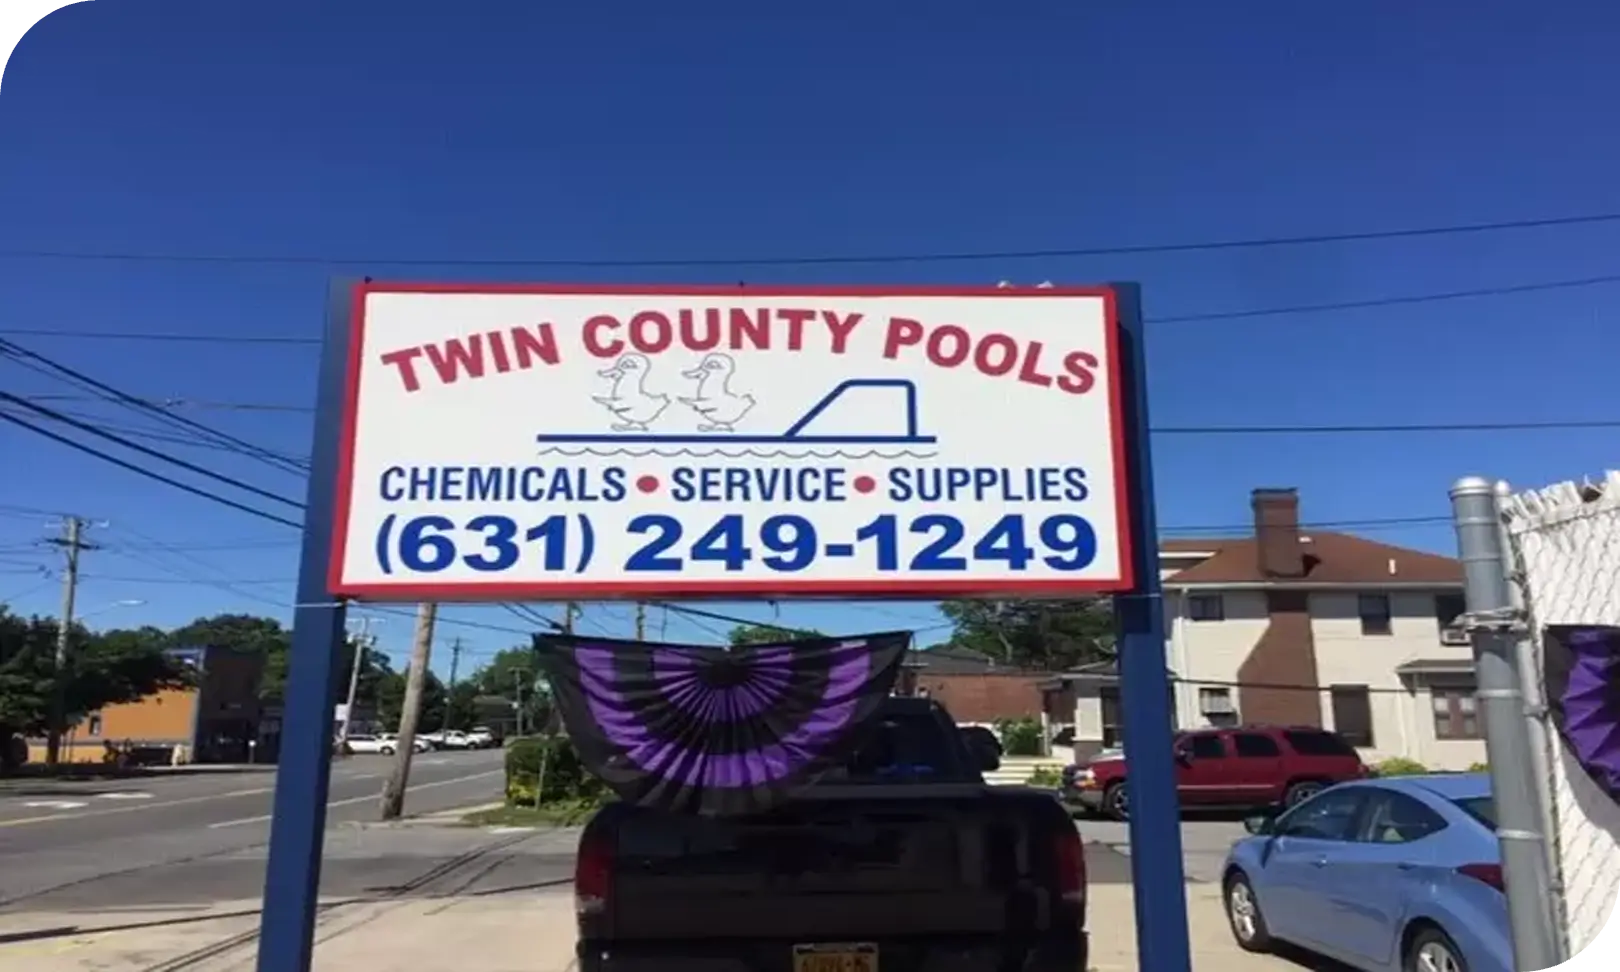 A sign for twin county pools and chemicals.